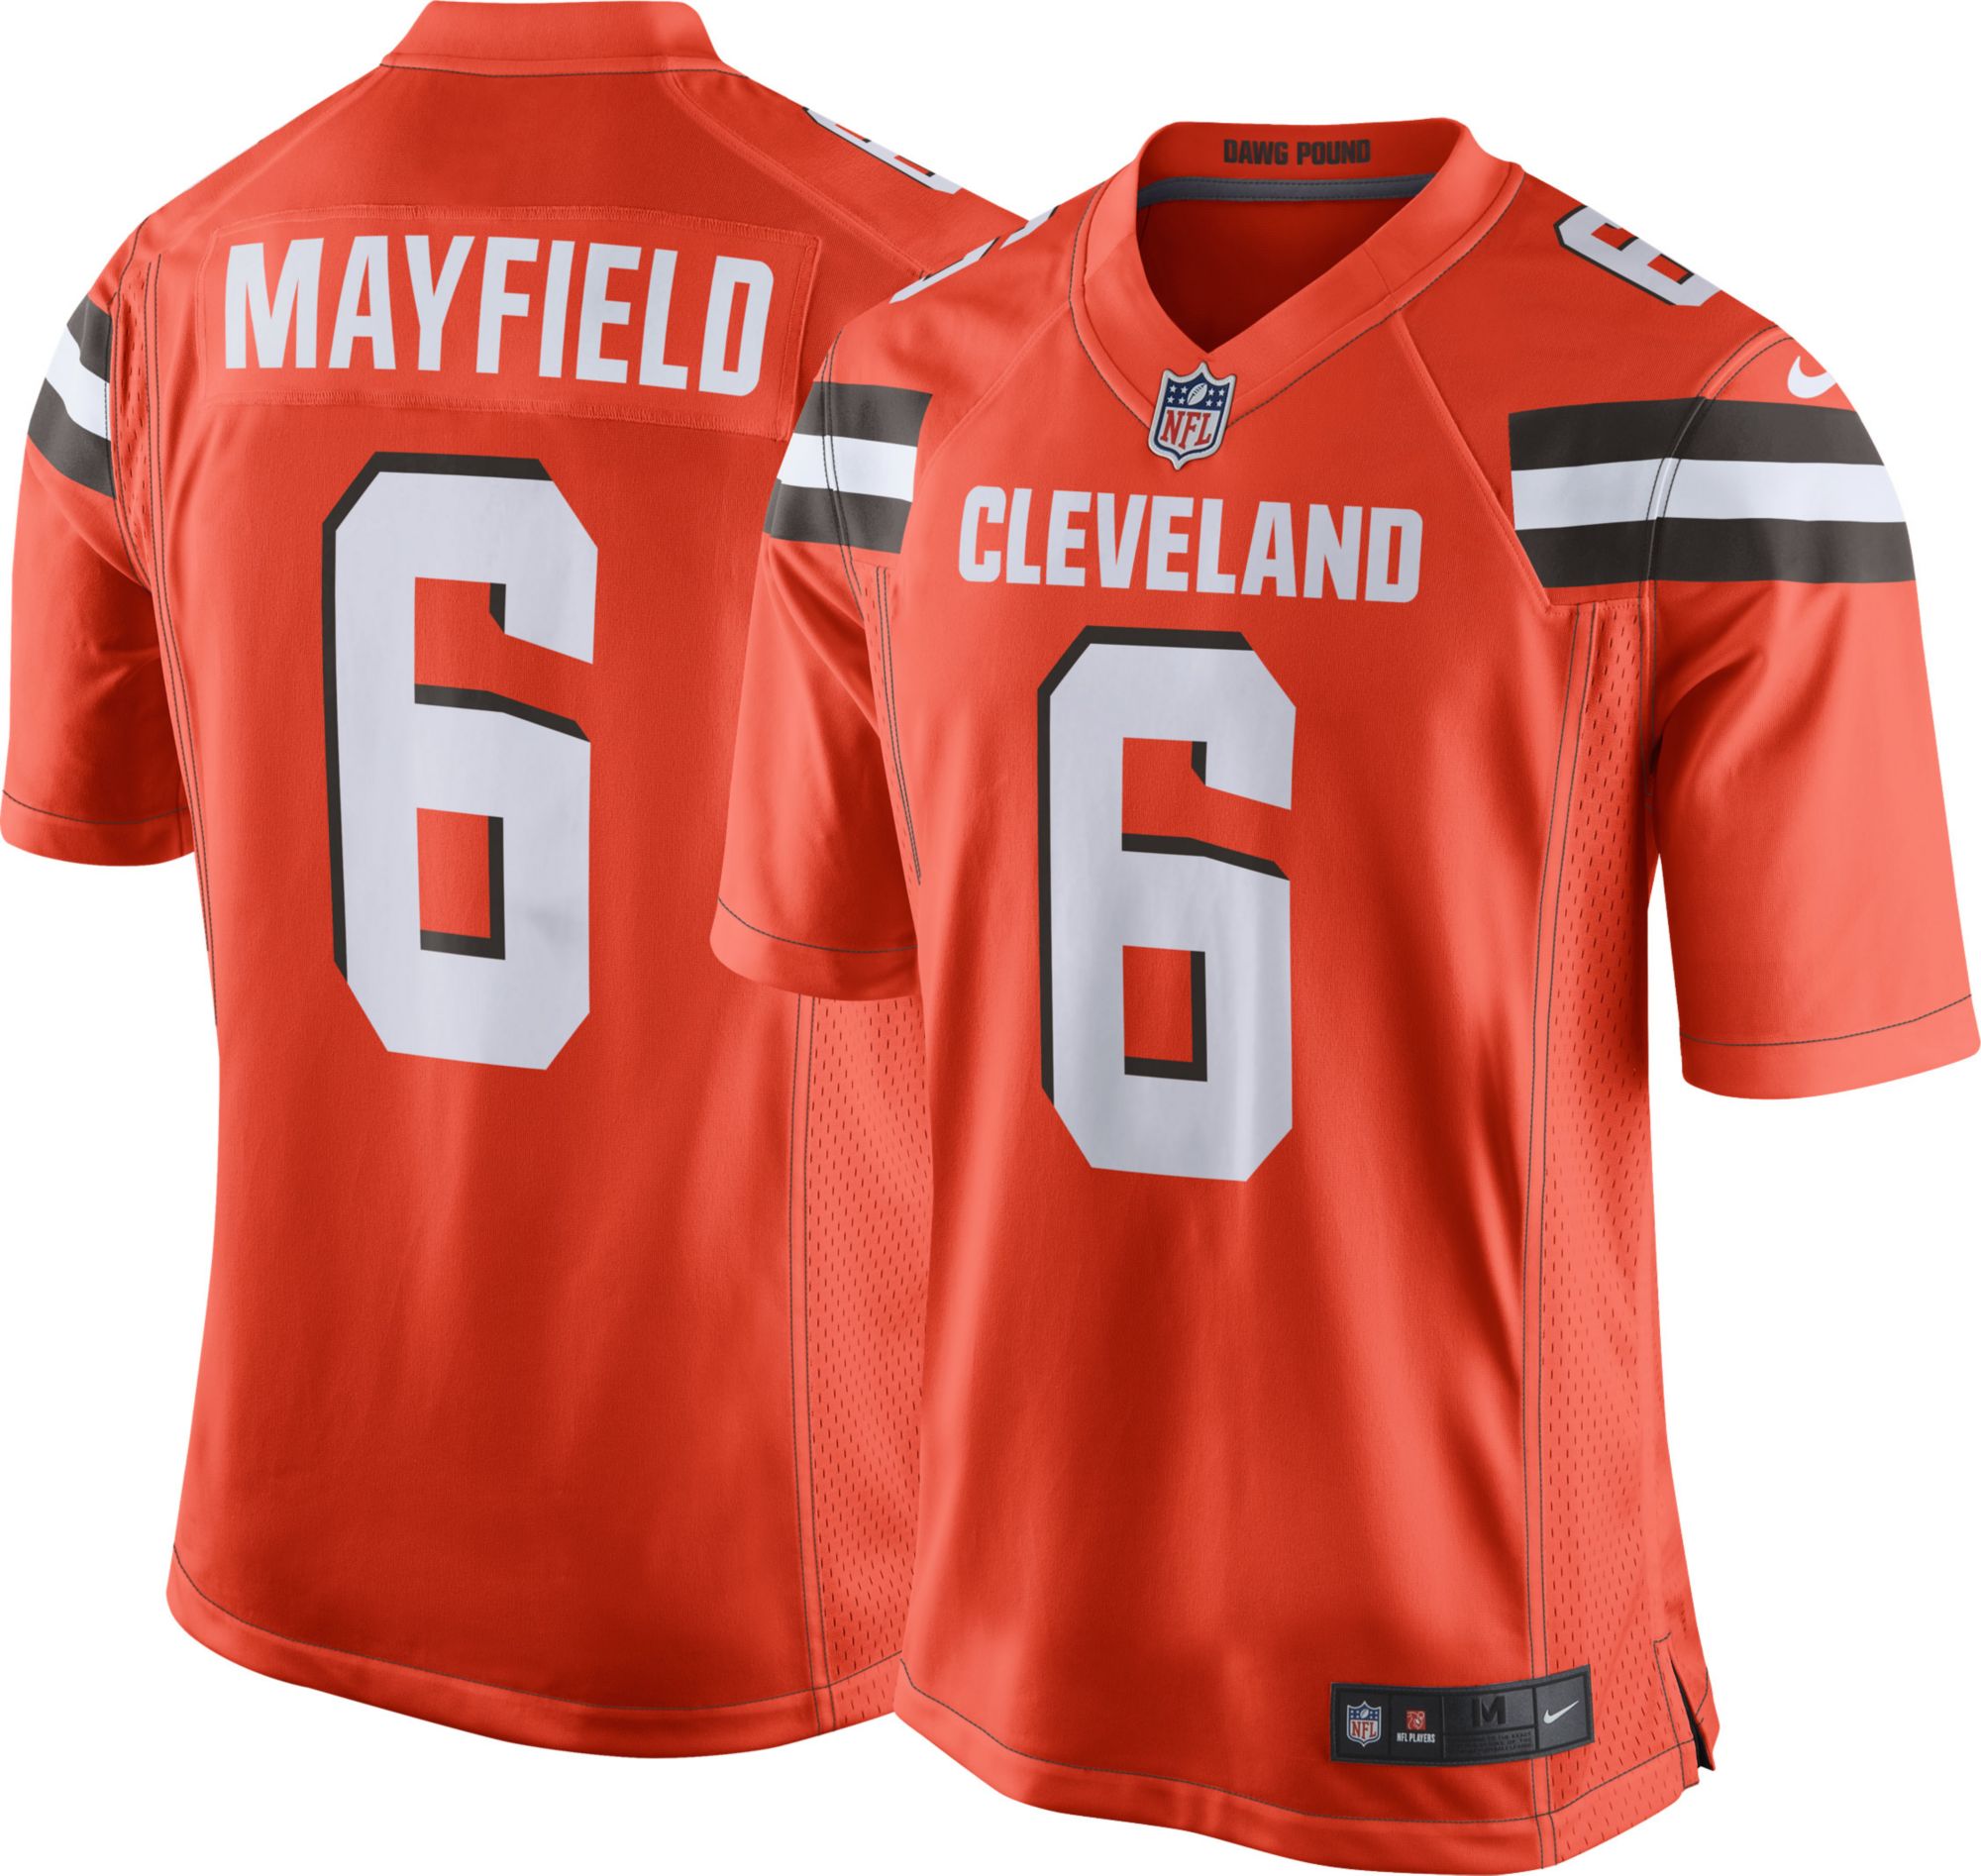 baker mayfield throwback jersey